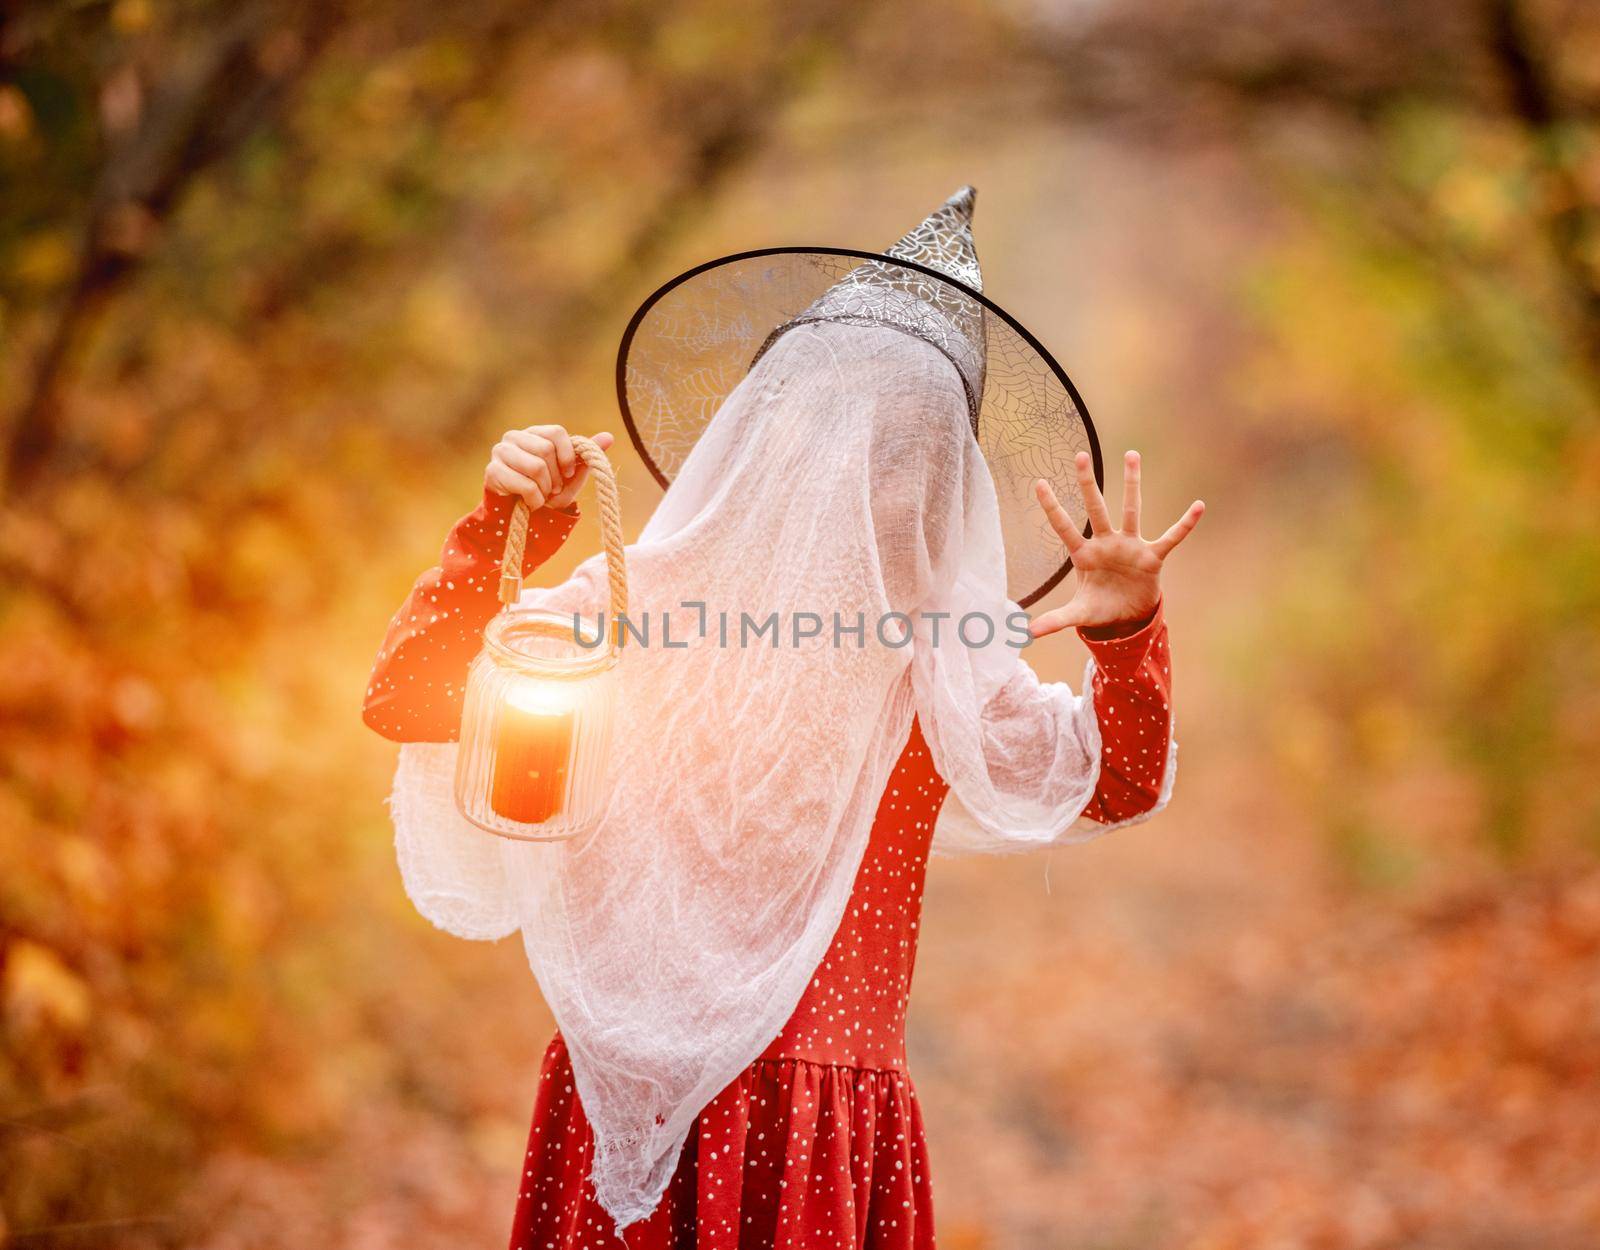 Little girl in halloween costume with candle frighting on autumn nature background